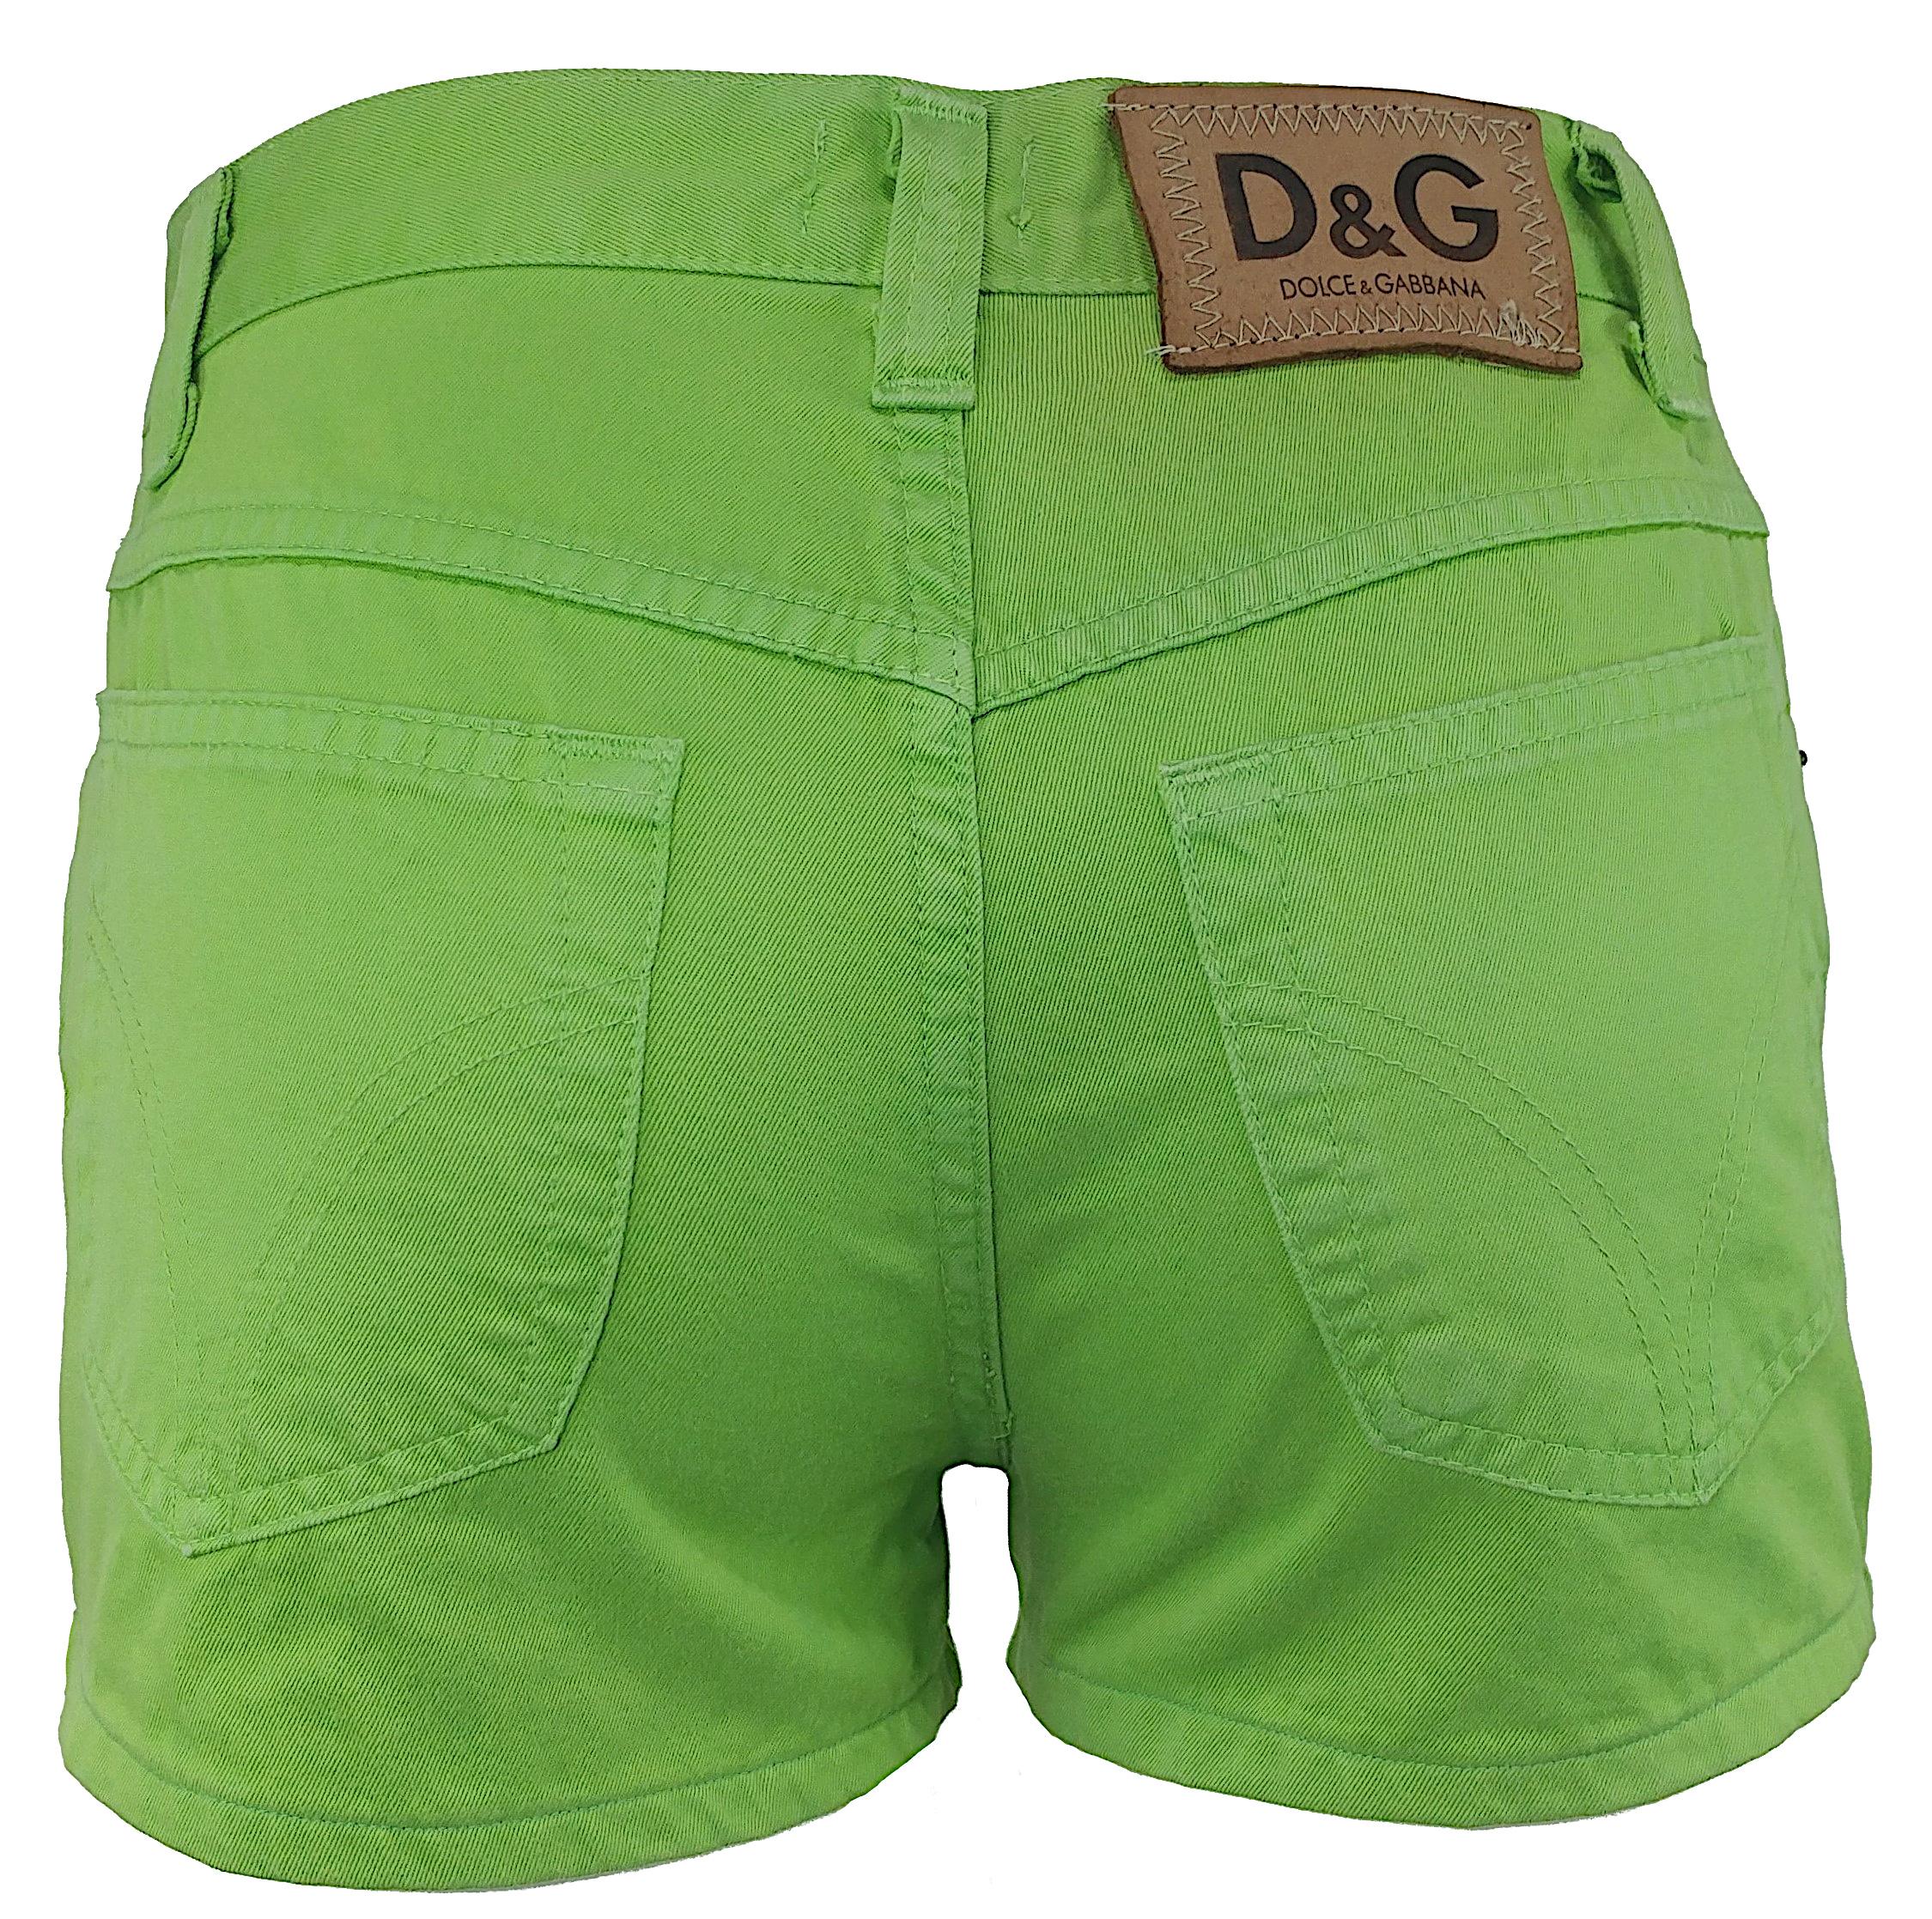 DOLCE & GABBANA - Green Cotton Denim Shorts or Hot Pants | Size 4US 36EU In Good Condition For Sale In Cuggiono, MI